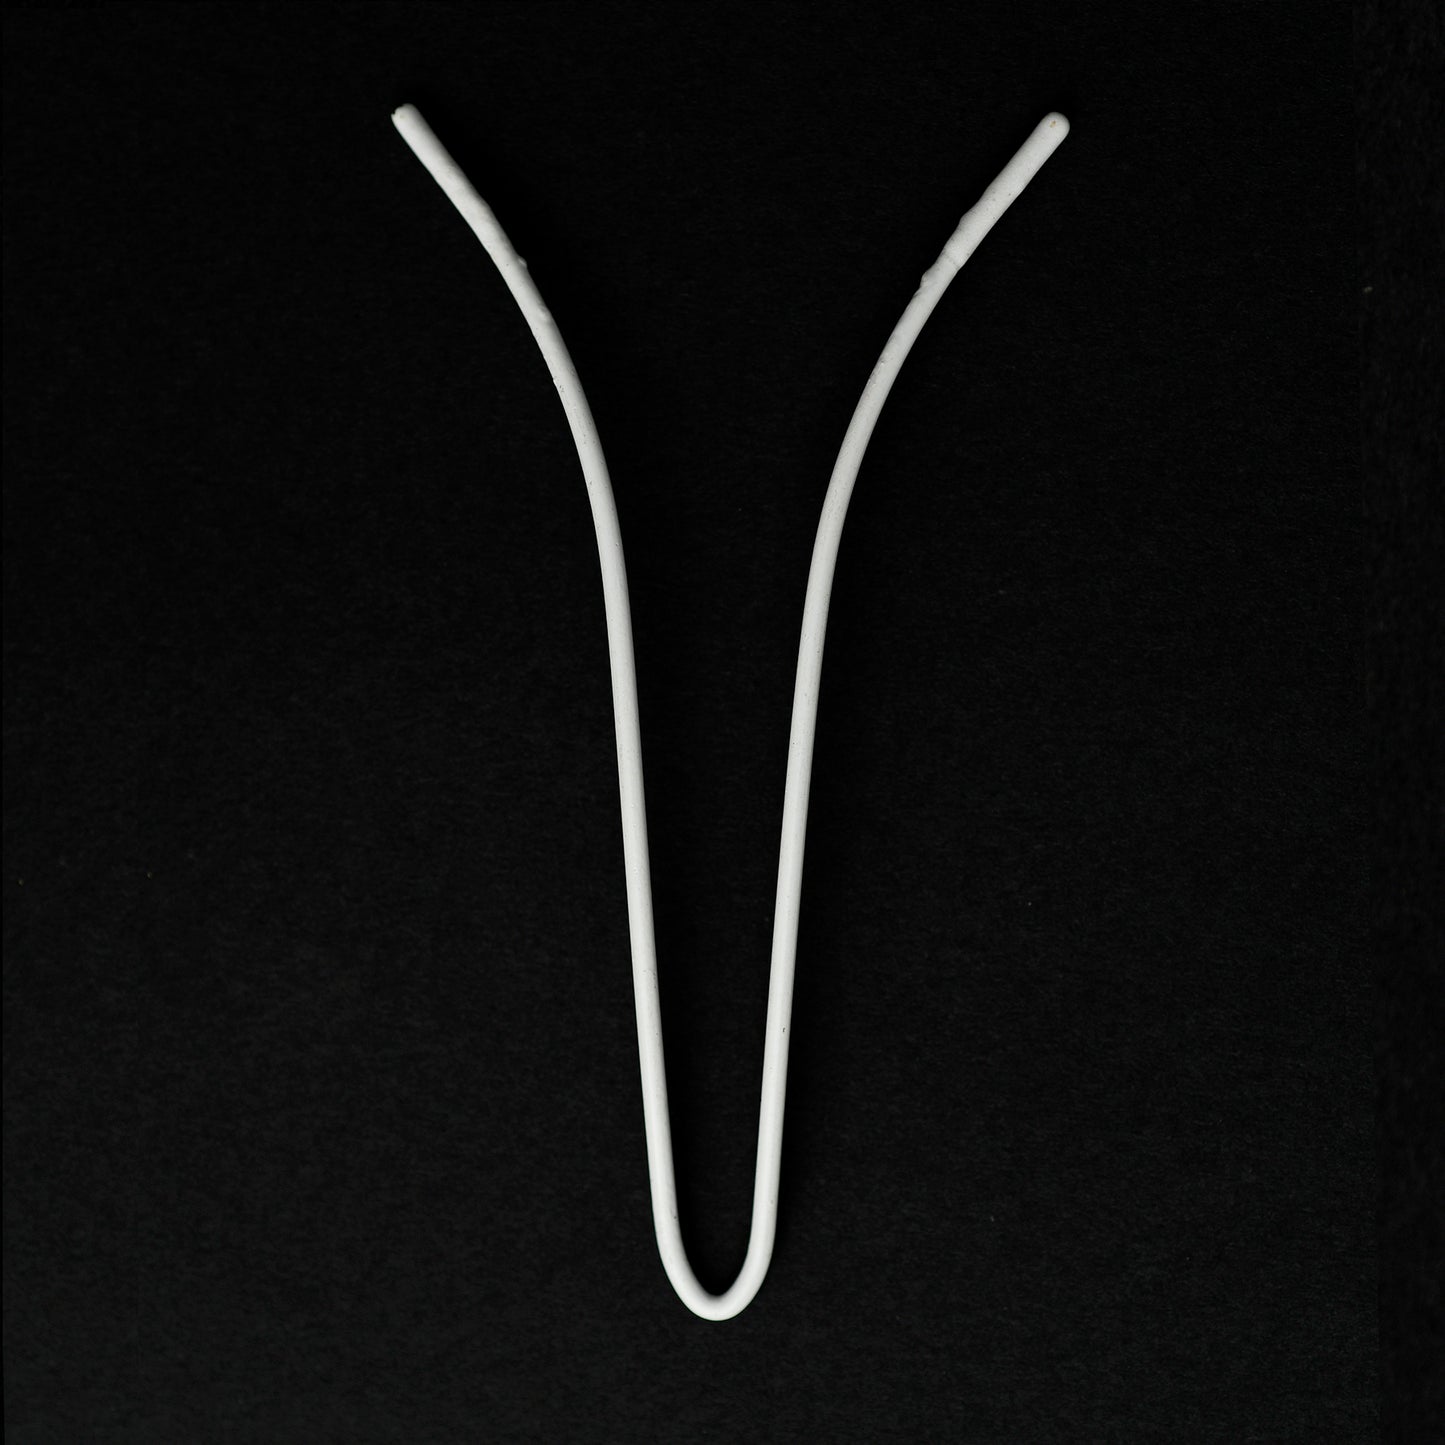 98MM x 52MM NYLON-COATED CURVED AND SHAPED V WIRE